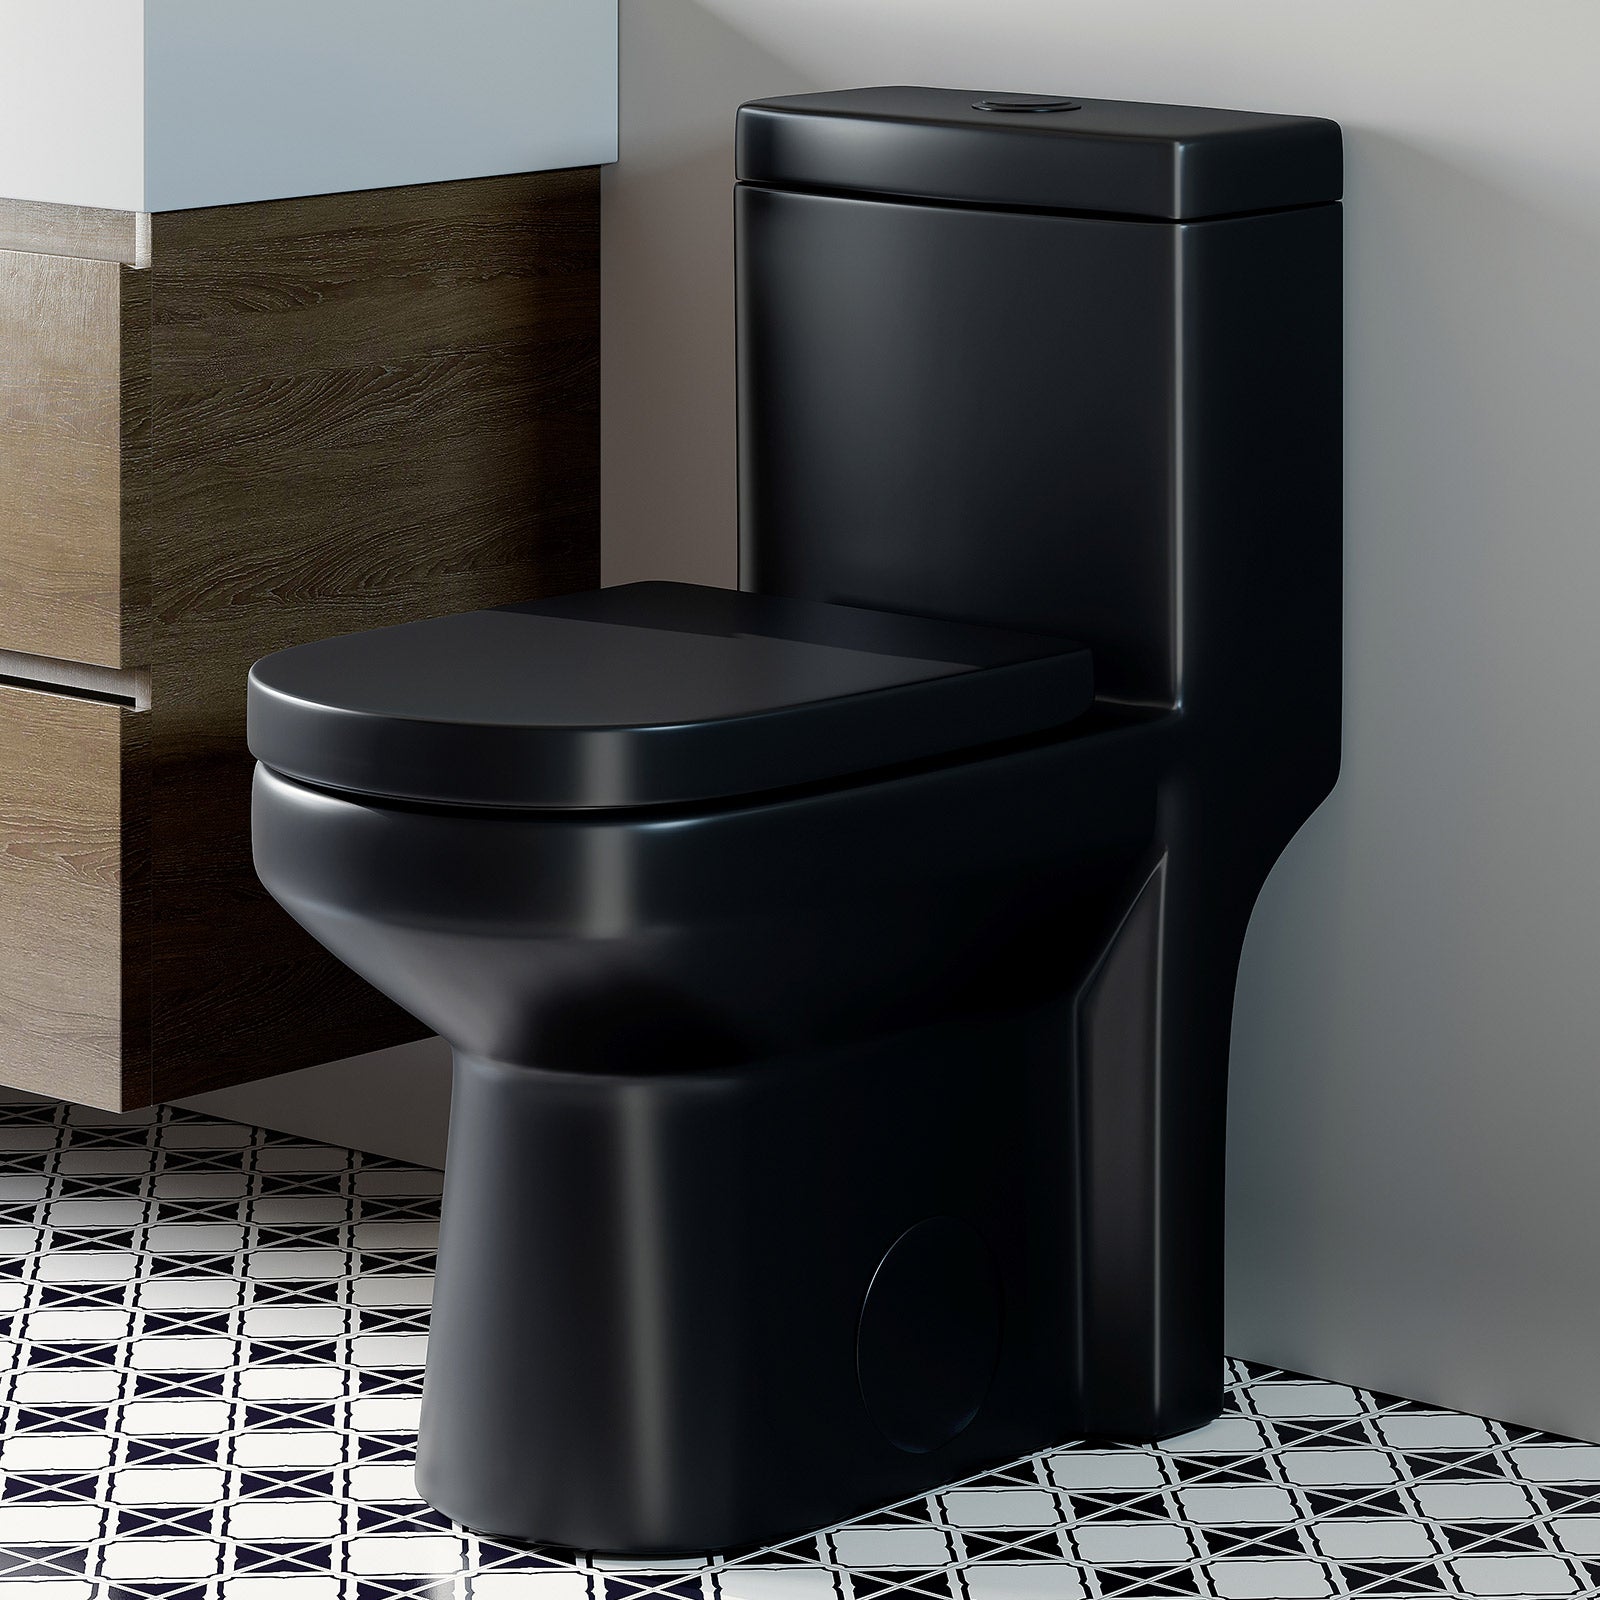 HOROW HWMT 8733 Black One Piece Toilet For 12 Inch Rough In Model 8733B